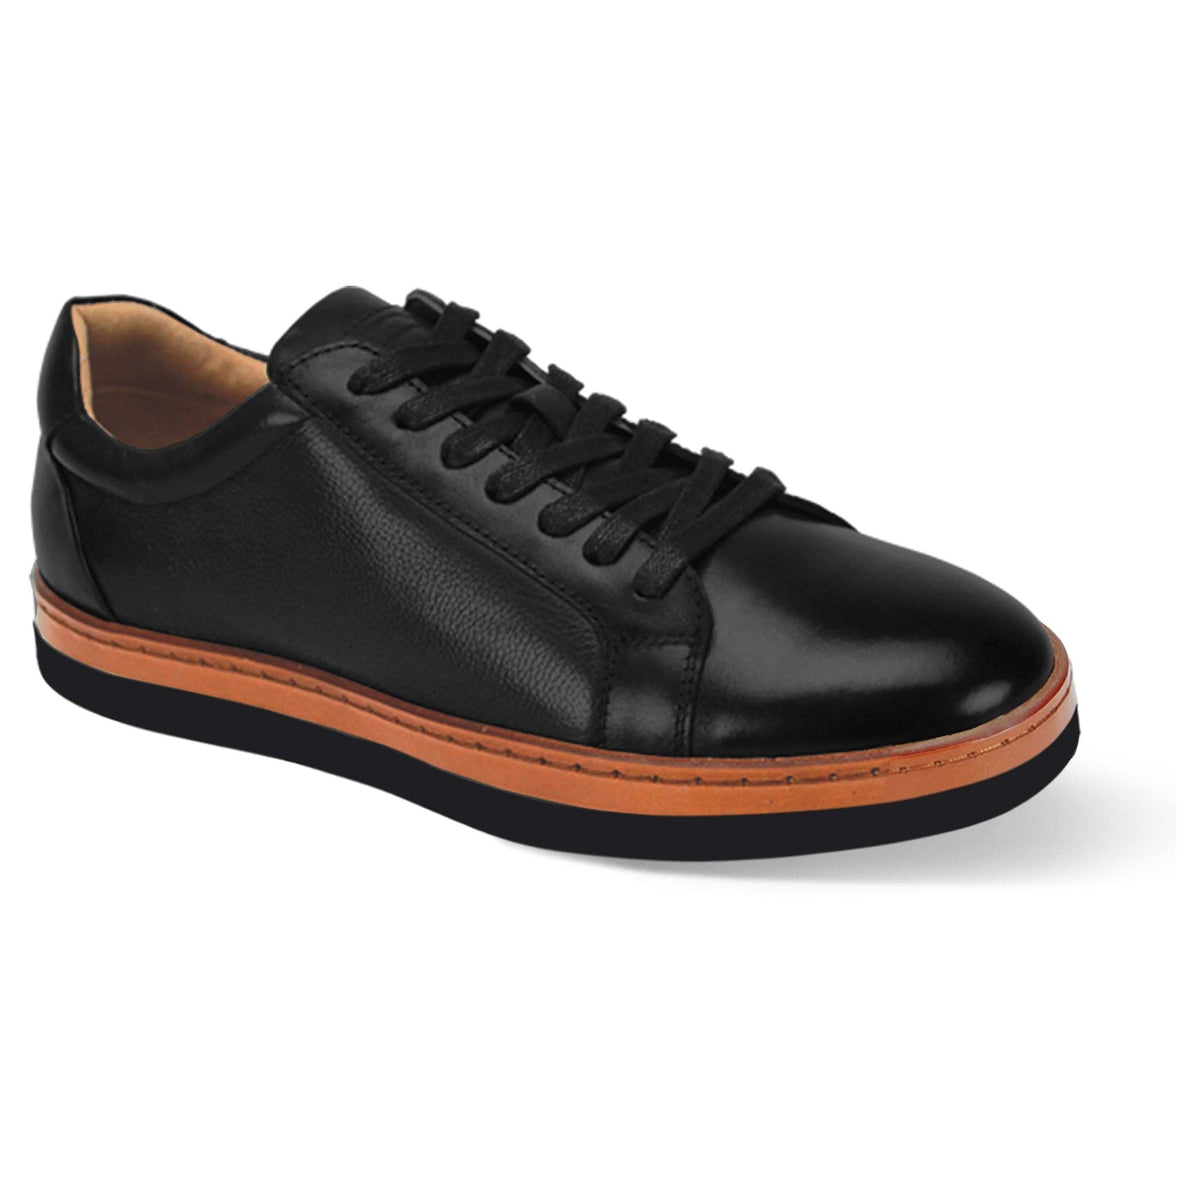 GIOVANNI LEATHER SHOES FT BLACK / 7 GIOVANNI LEATHER SHOES-PORTER